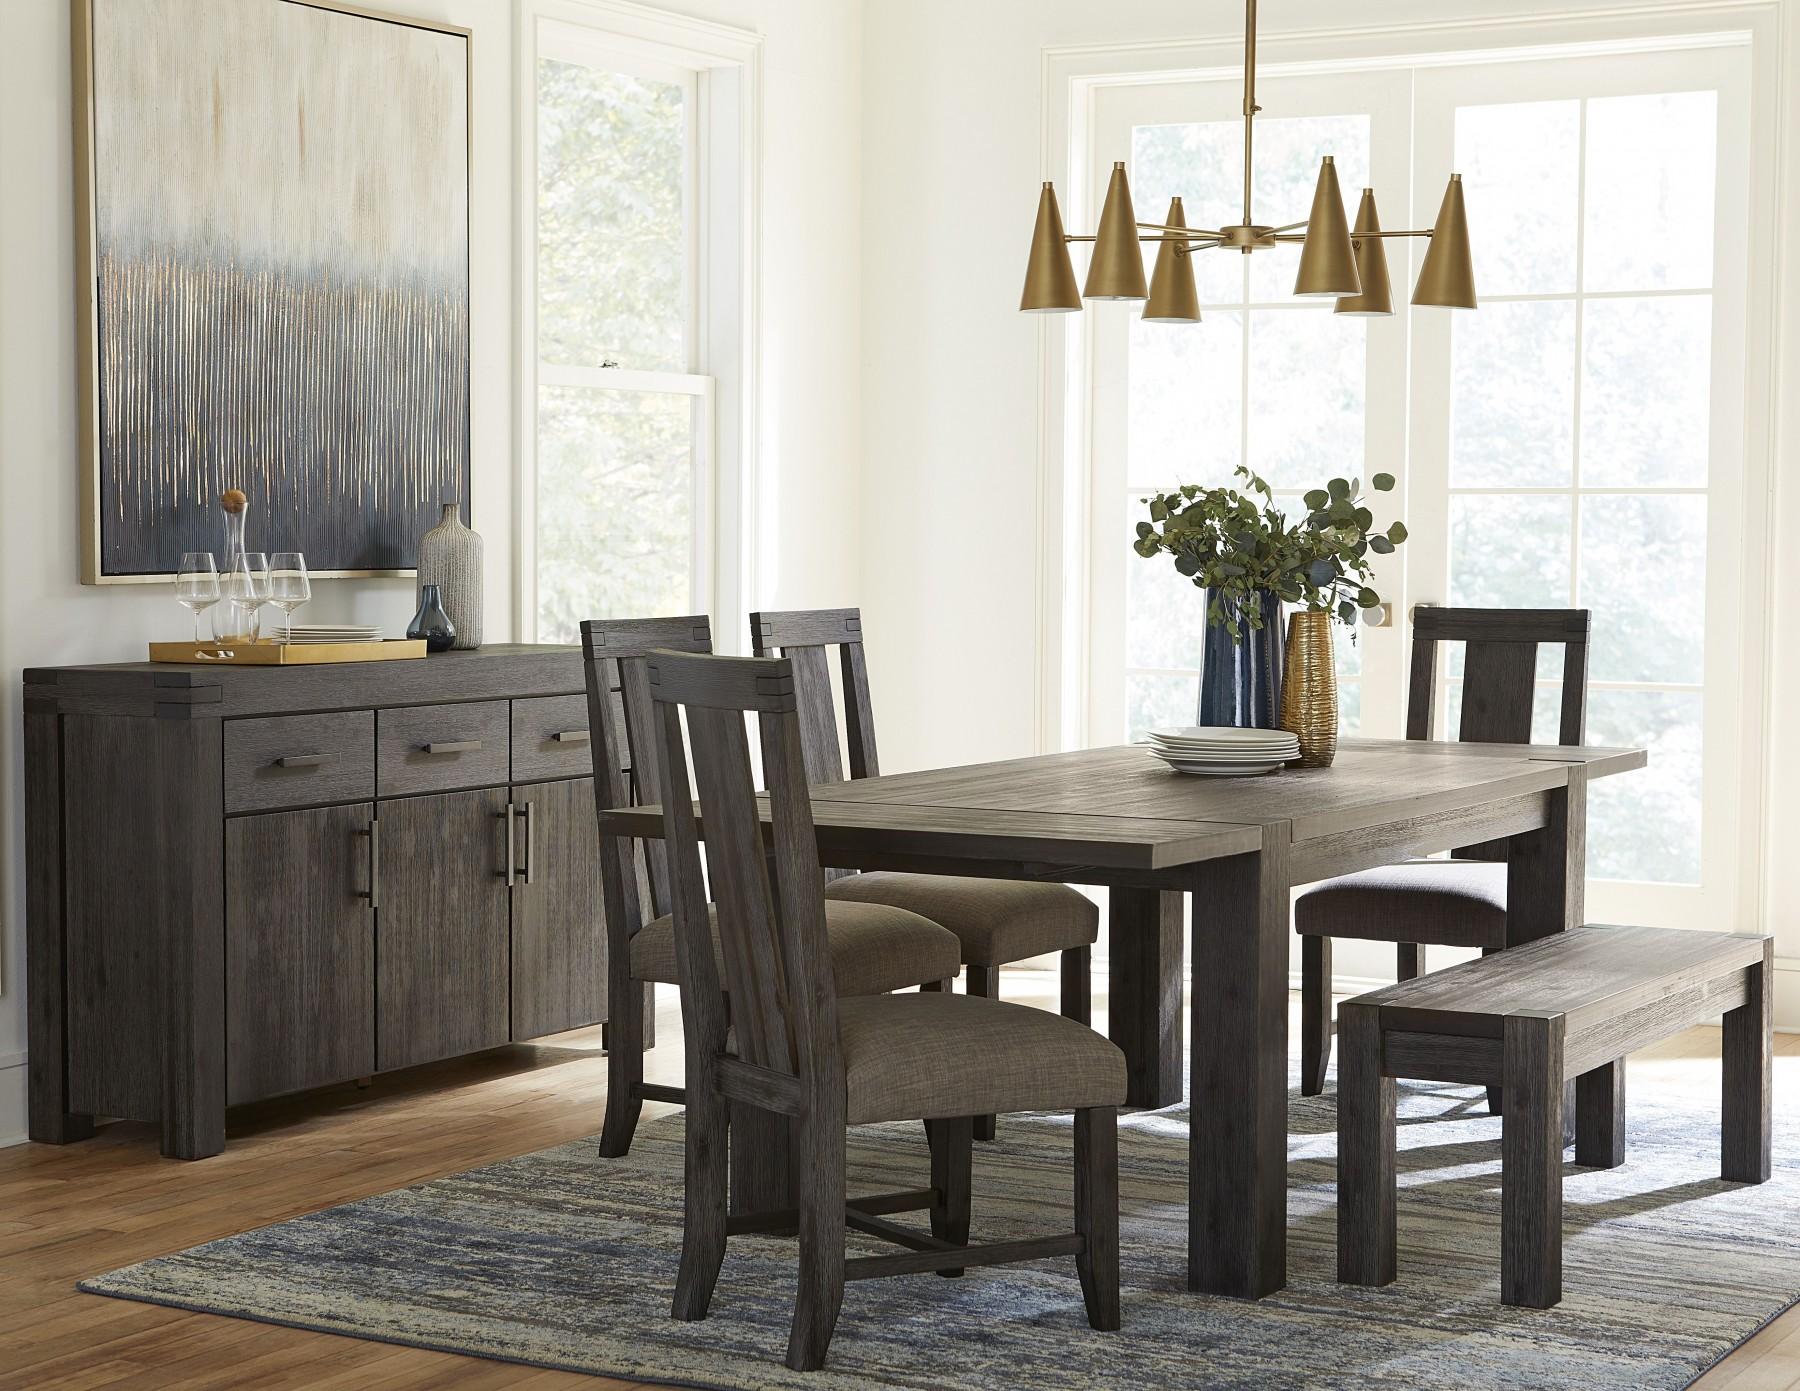 

    
Graphite Finish Acacia Solids Dining Set 7Pcs w/ Sideboard MEADOW by Modus Furniture
